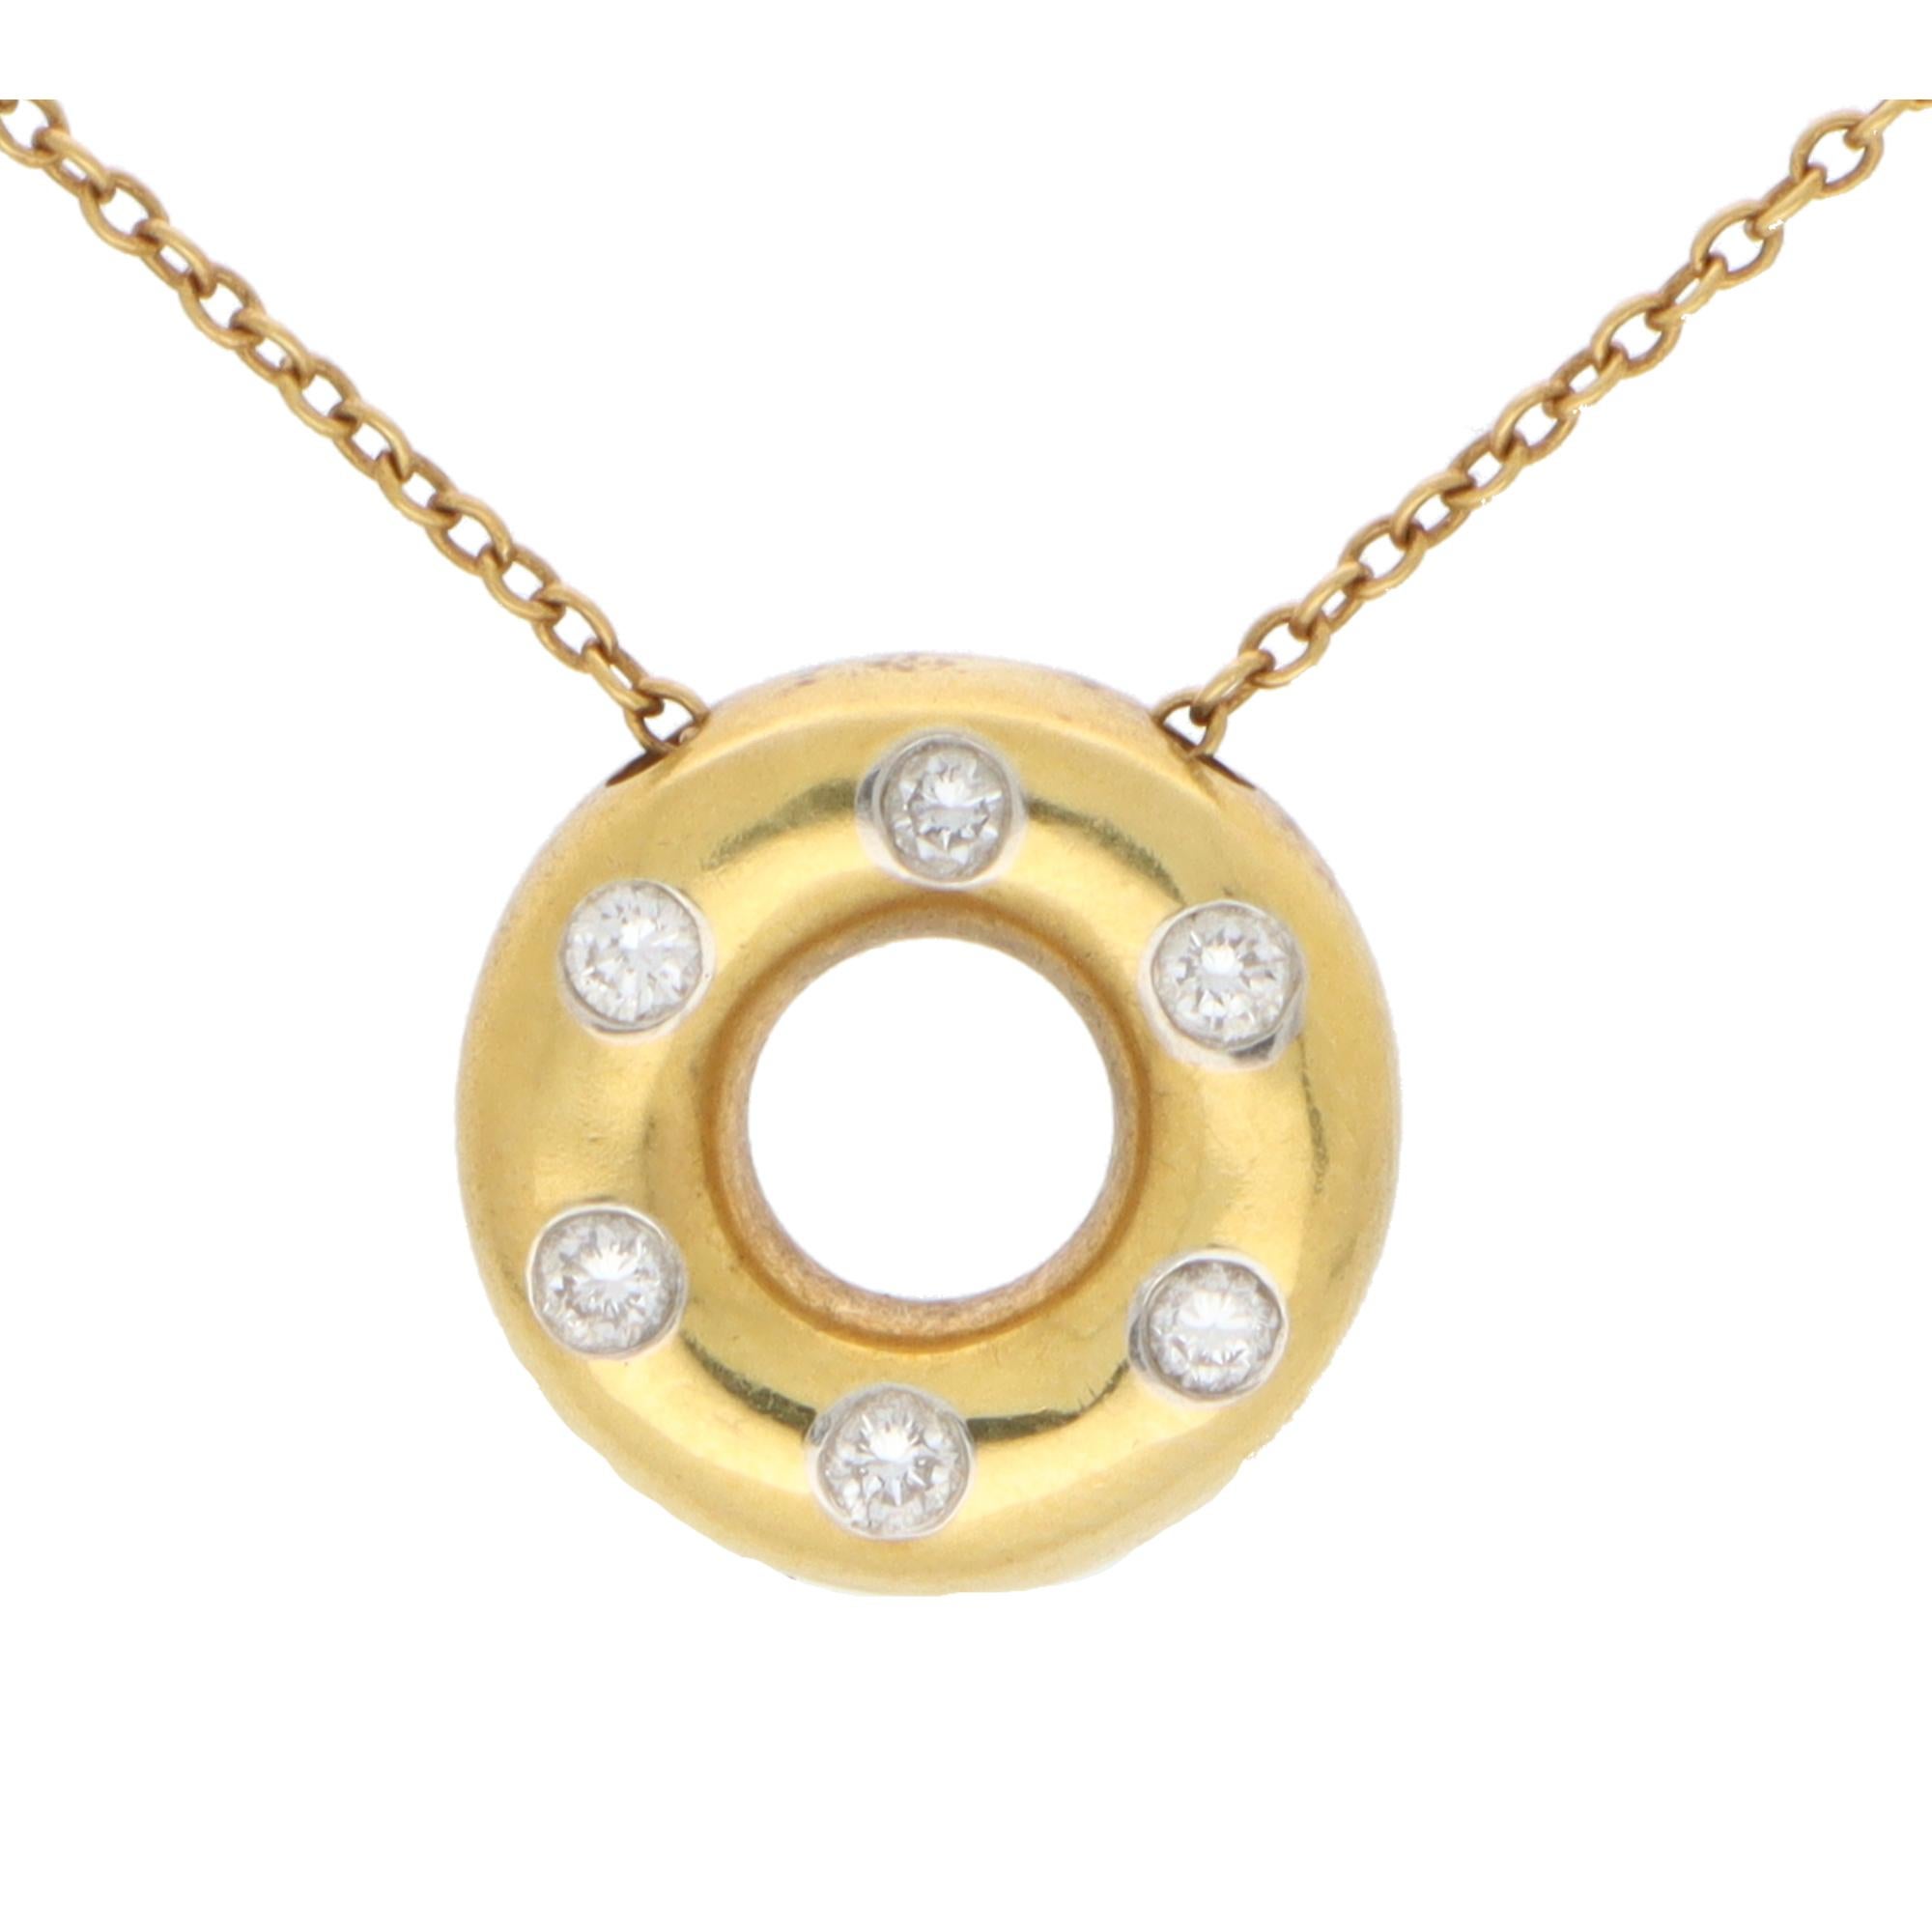  A beautiful vintage Tiffany & Co. ‘Etoile’ diamond pendant set in platinum and 18k yellow gold.

From the now discontinued ‘Etoile’ collection, the pendant depicts a solid yellow gold doughnut rubover set with six round brilliant cut diamonds. Each